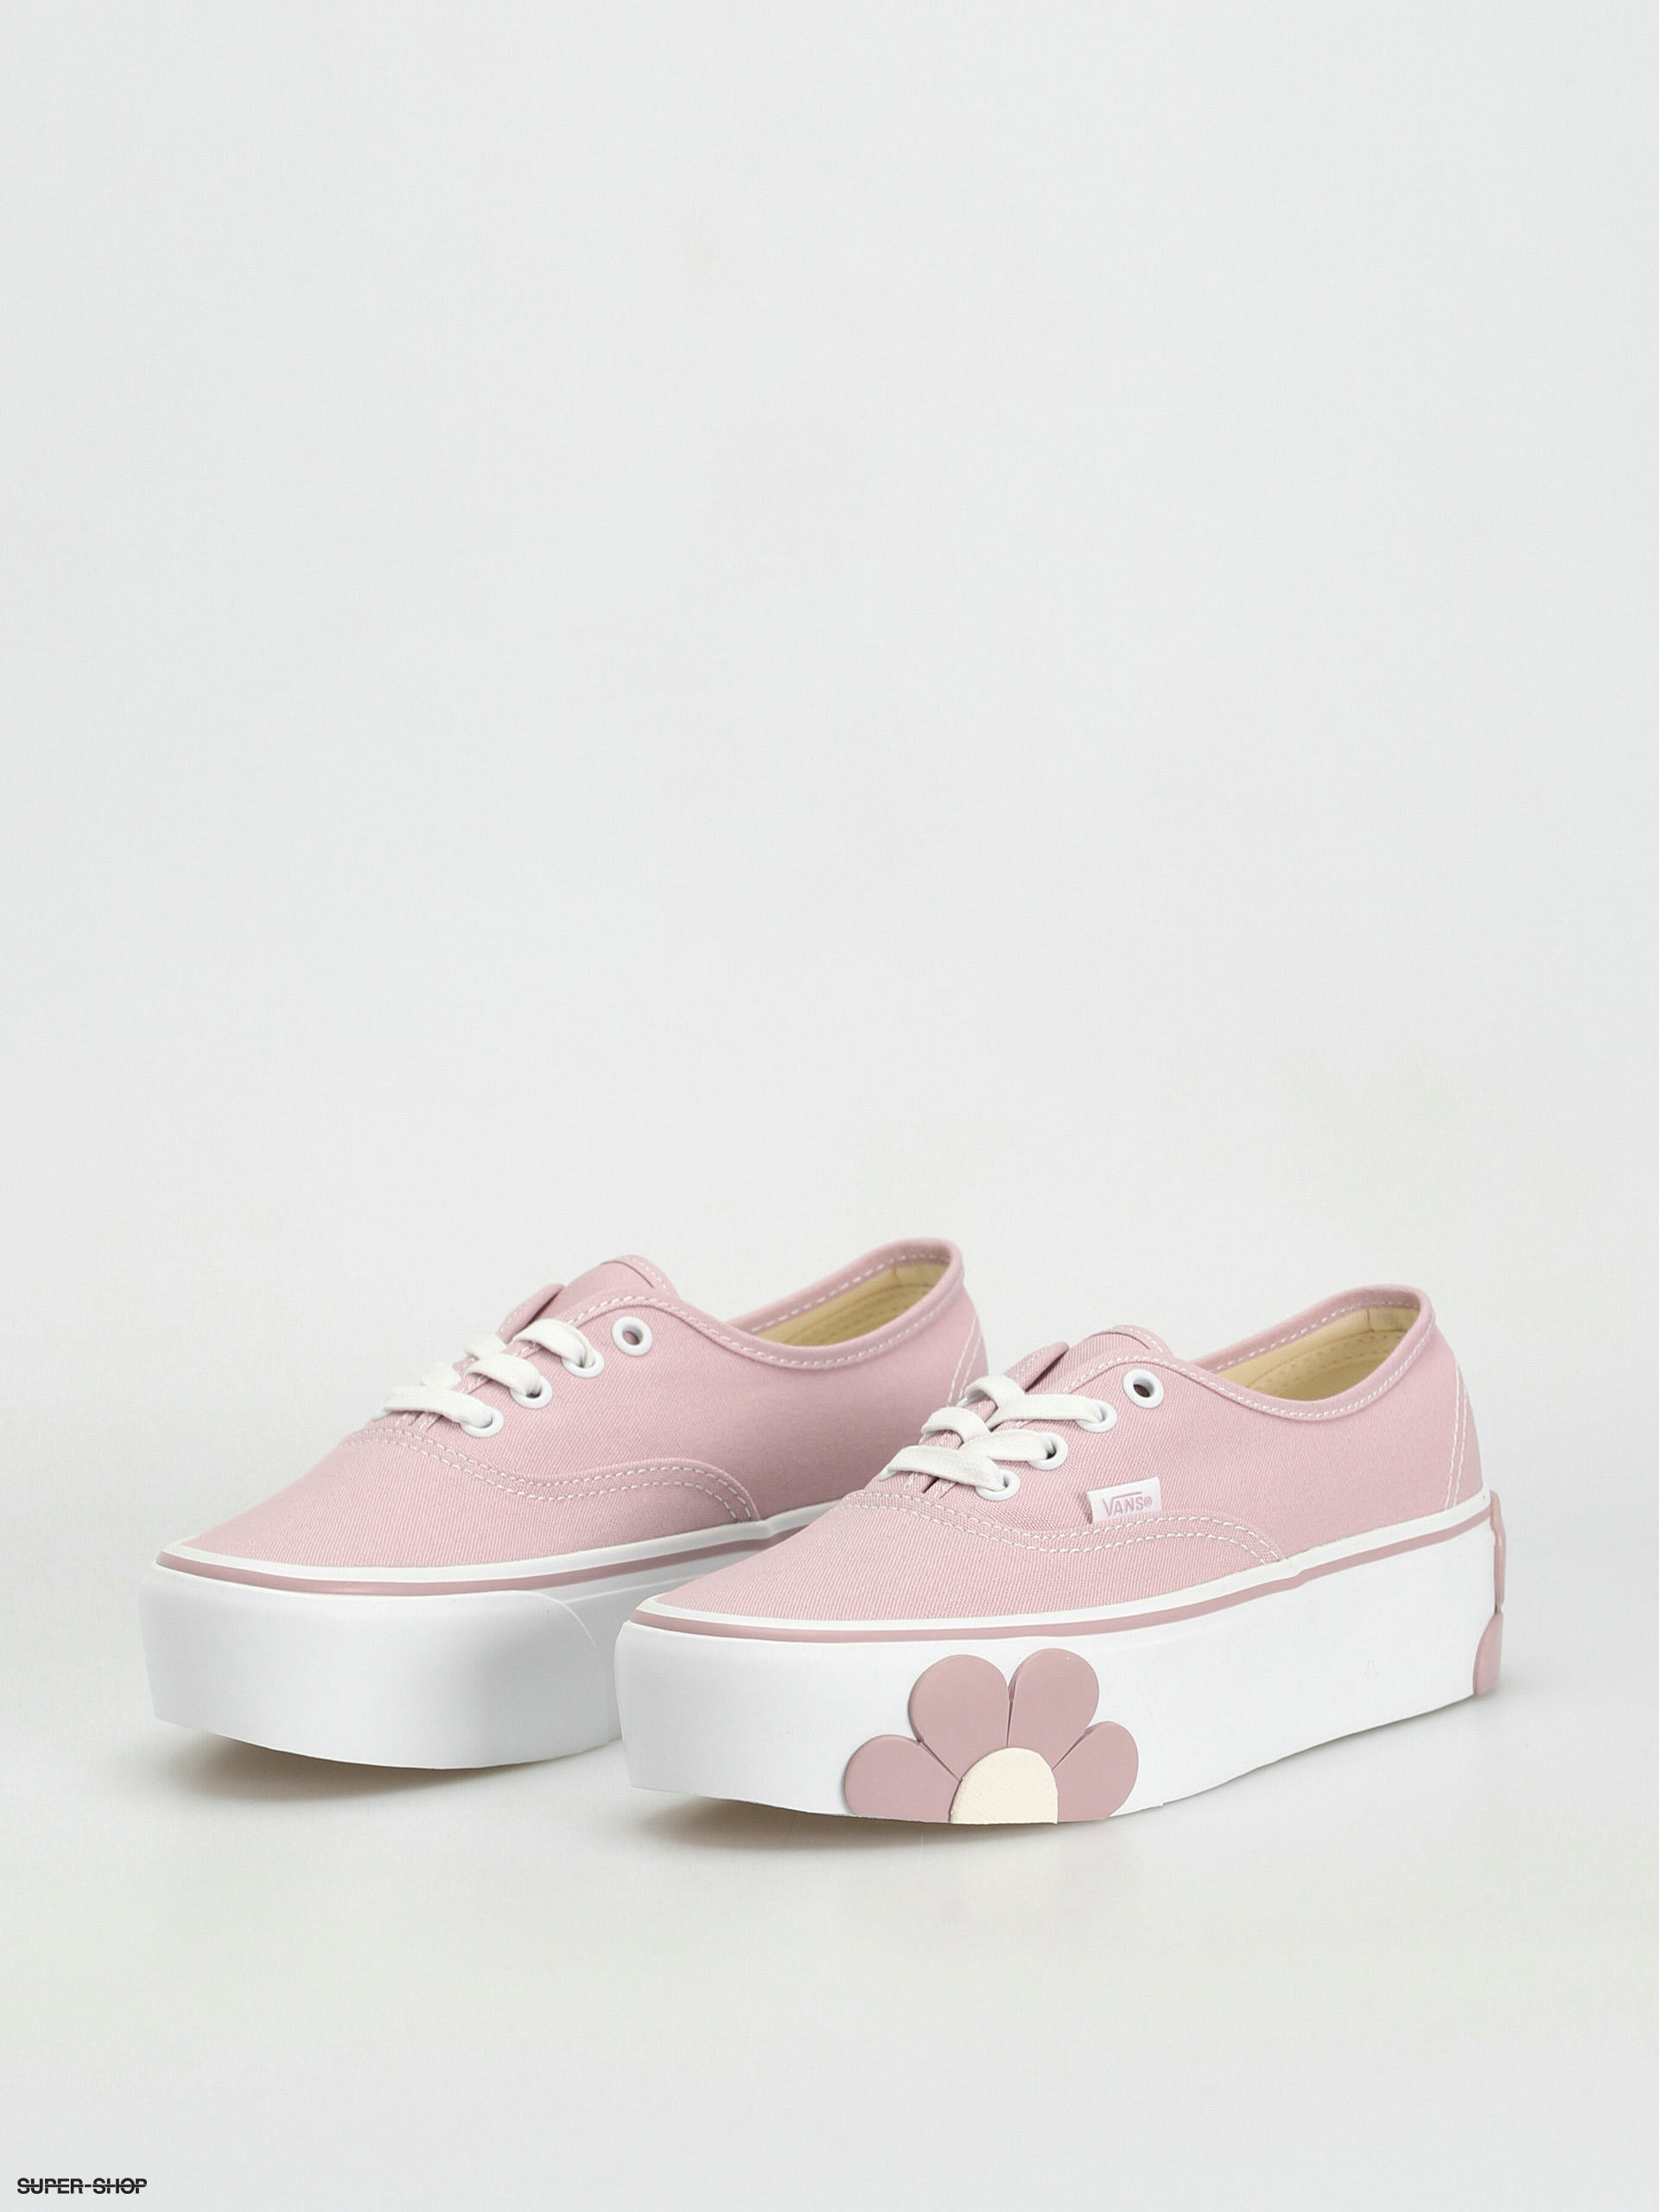 Vans Authentic Stackform Osf Shoes Wmn (keepsake lilac)